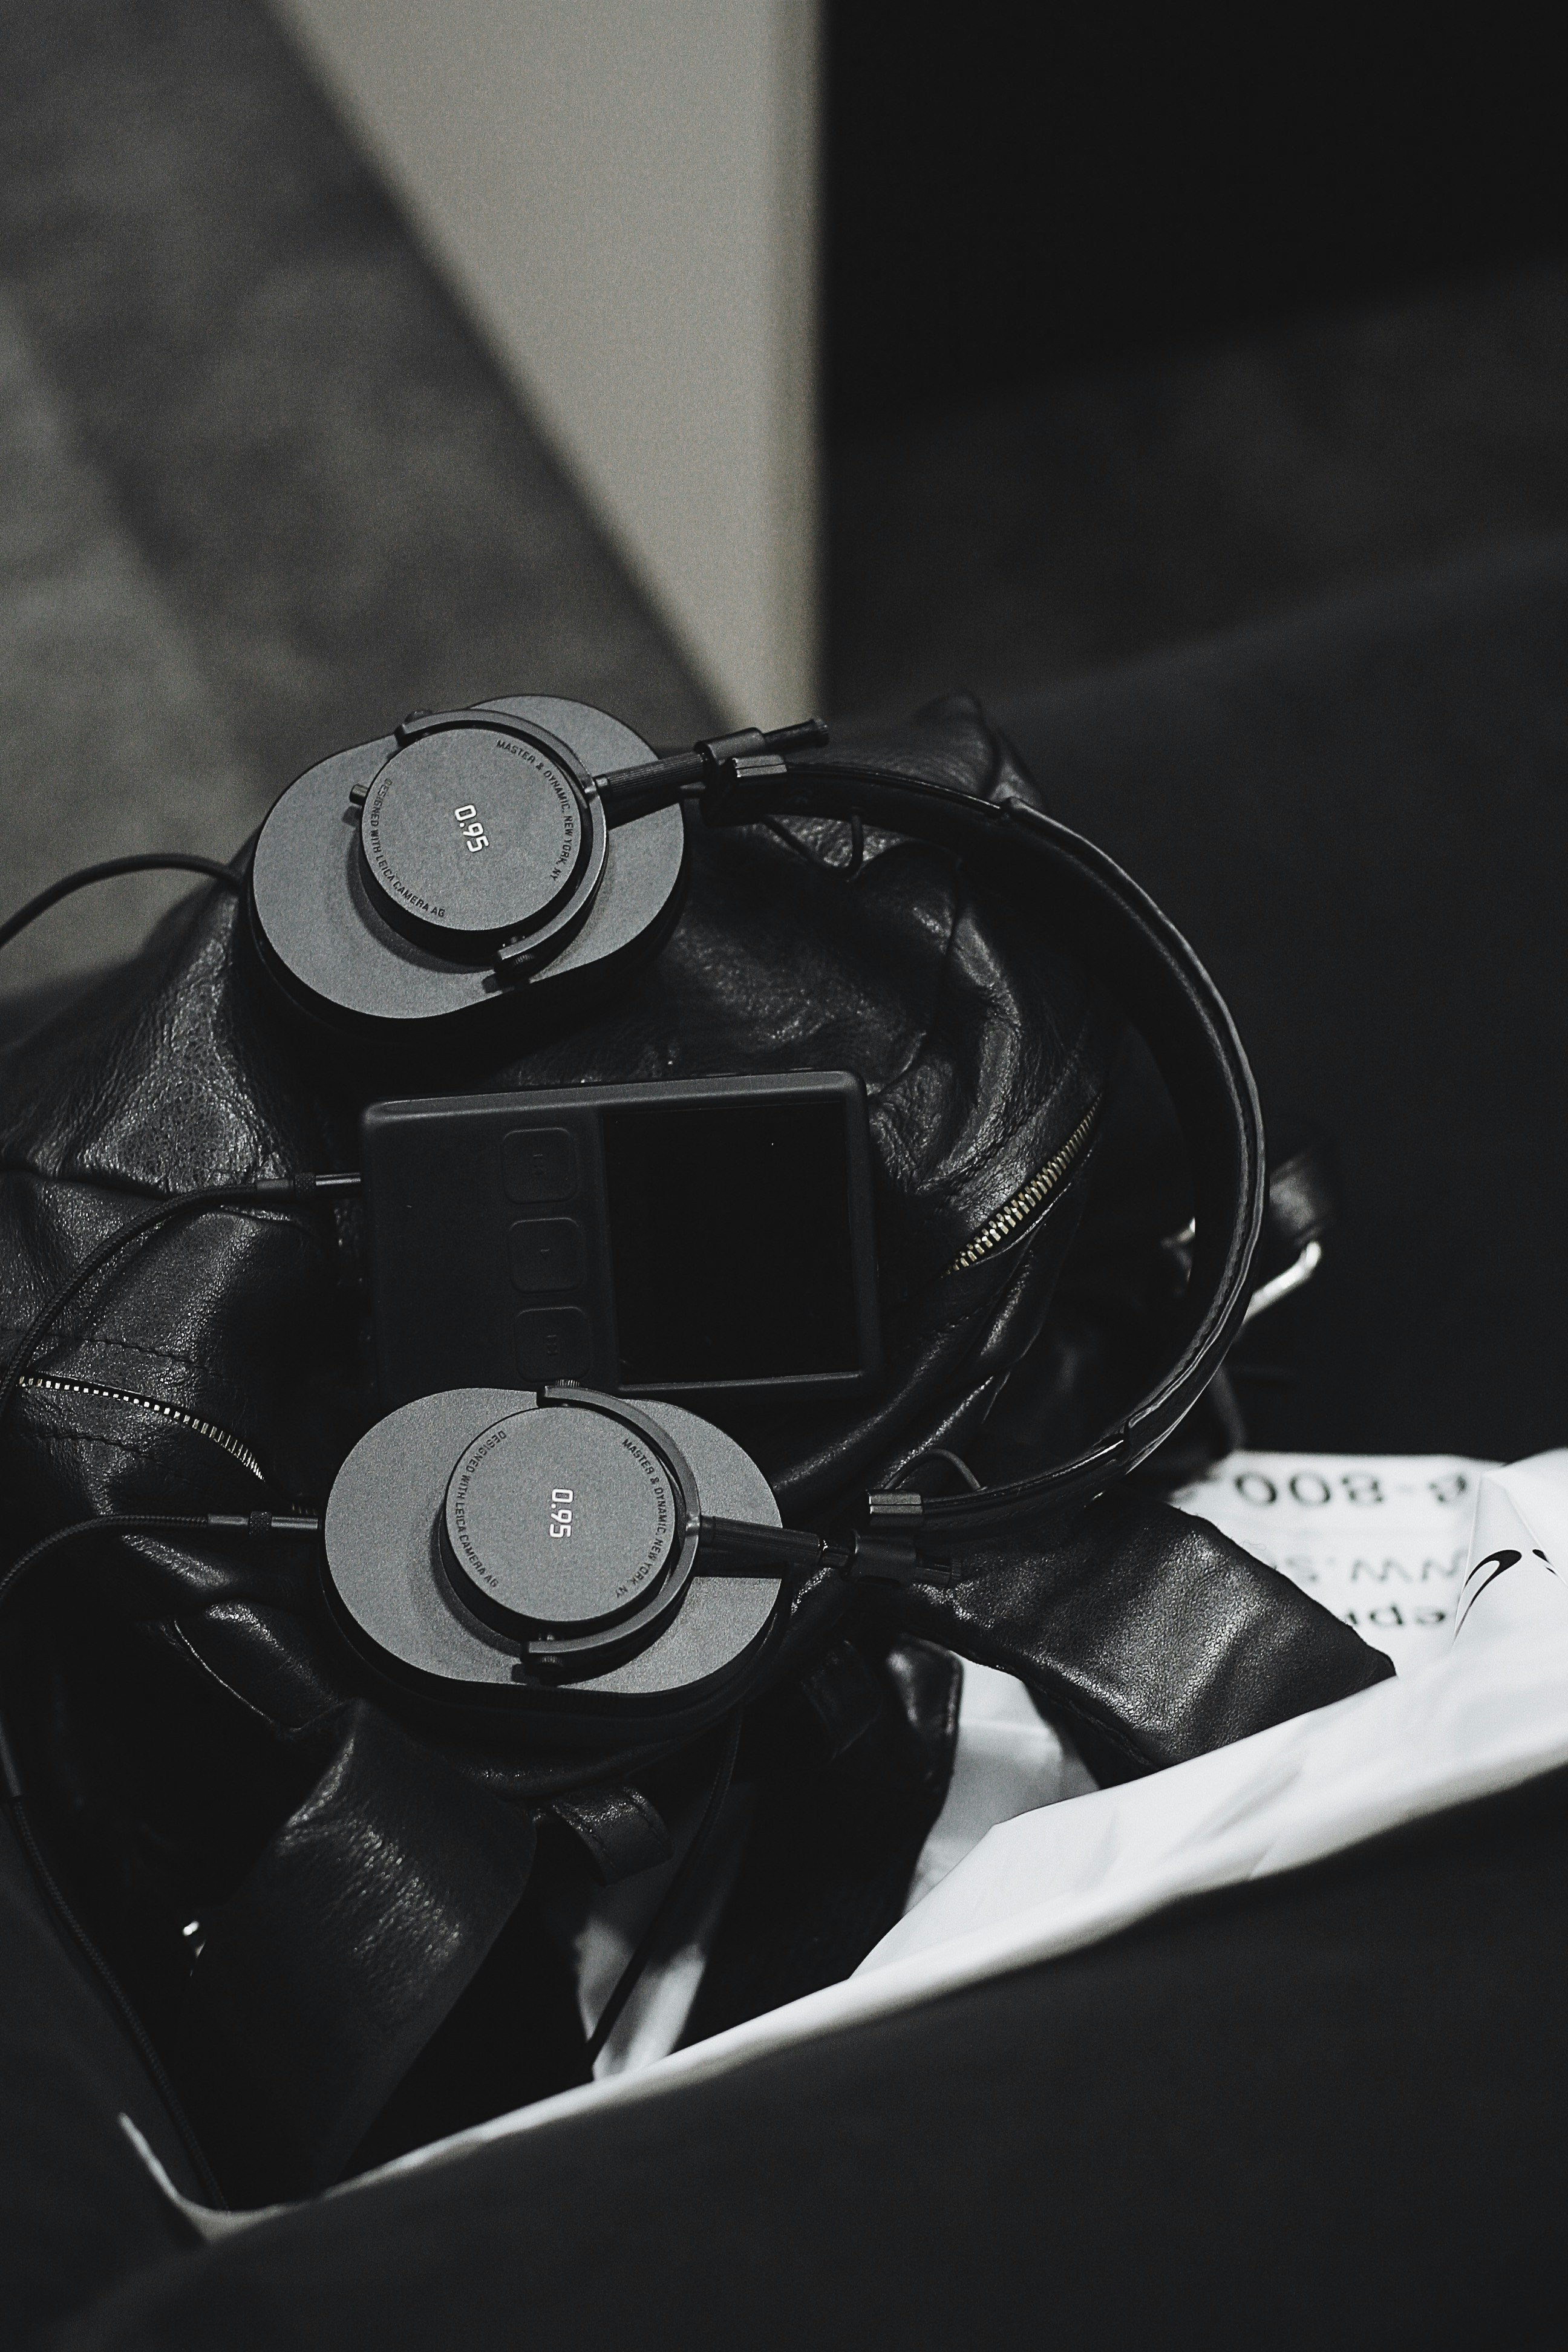 grayscale photo of headset and music player